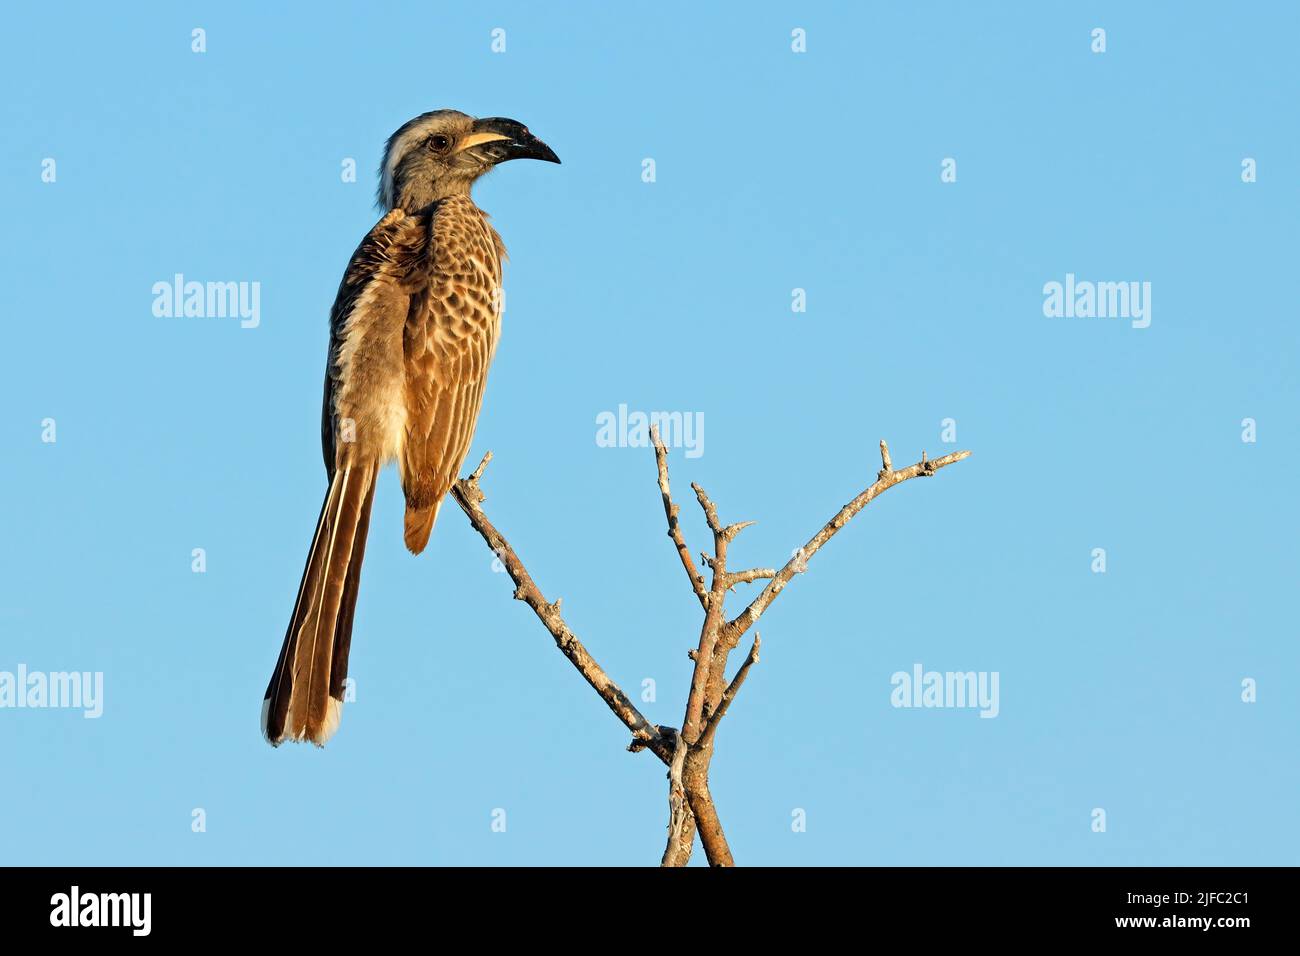 An African grey hornbill (Lophoceros nasutus) perched on a branch, Etosha National Park, Namibia Stock Photo